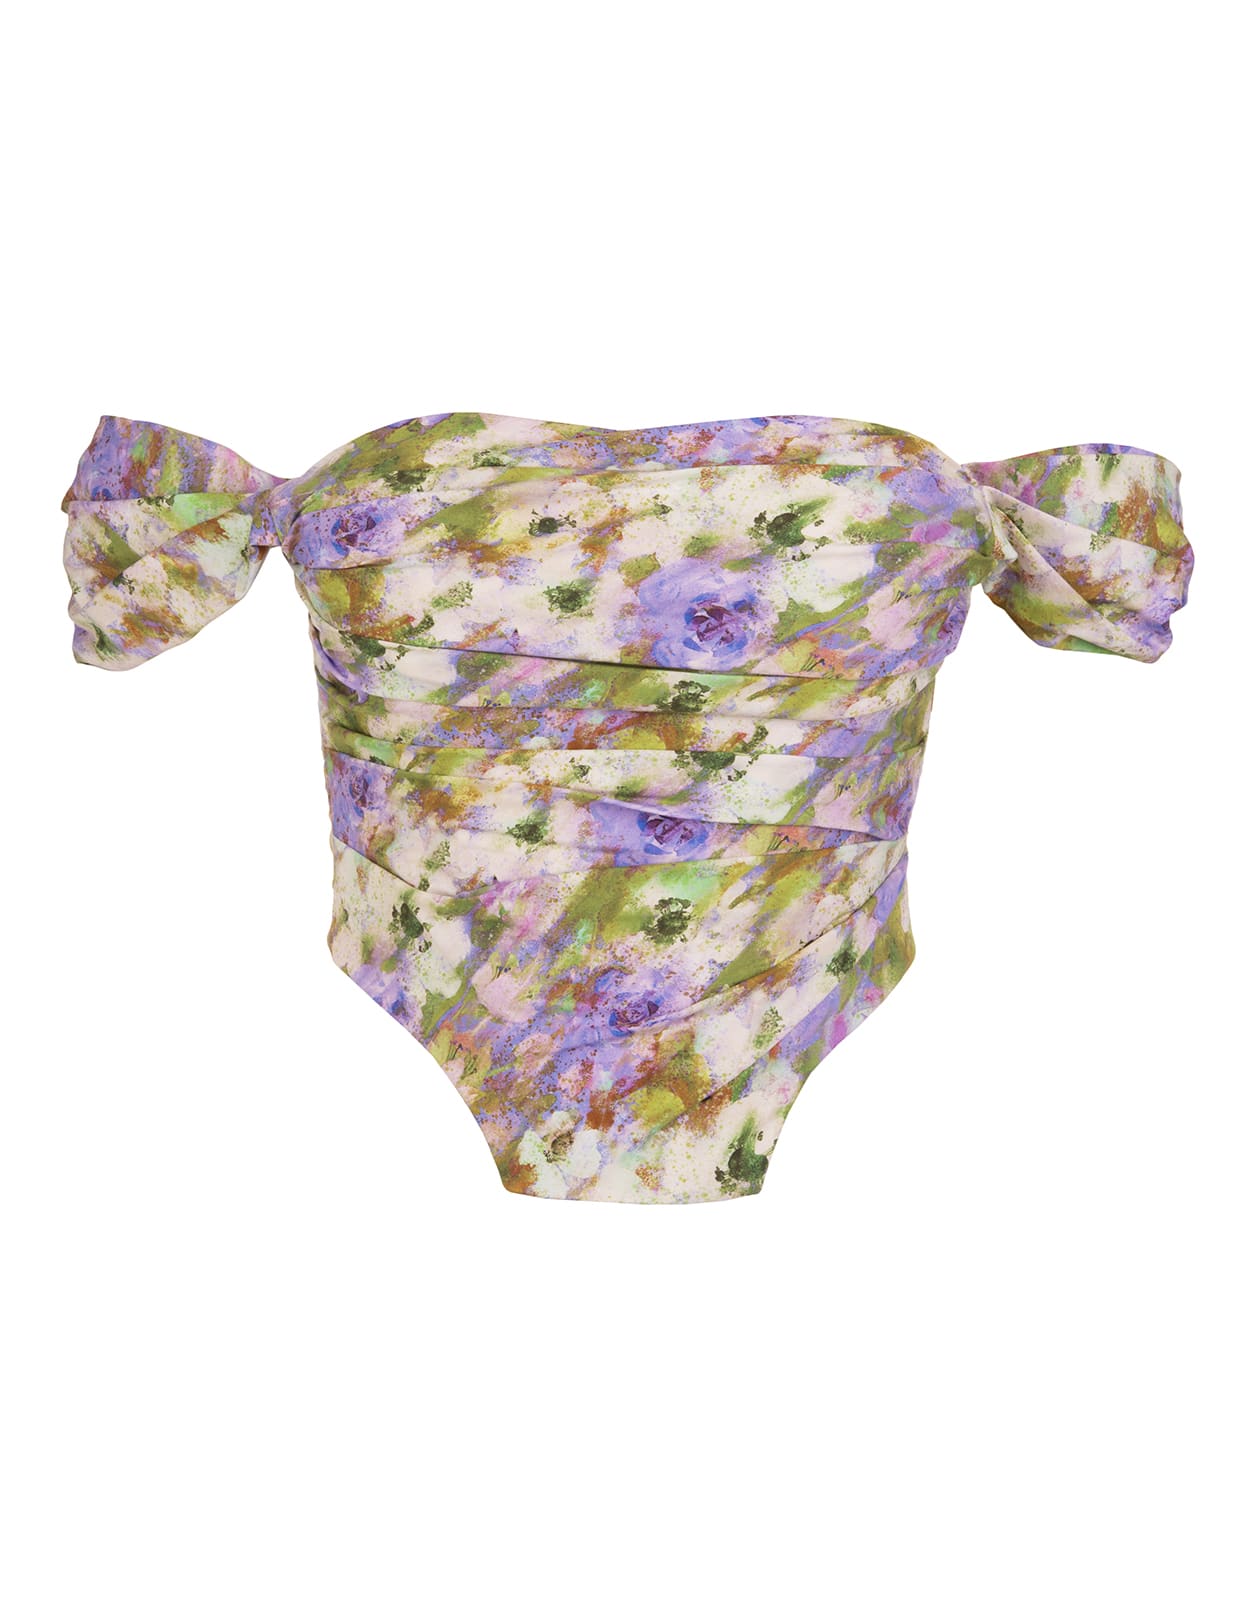 Giuseppe di Morabito Bustier Top With Draping And All-over Green And Lilac Floral Print